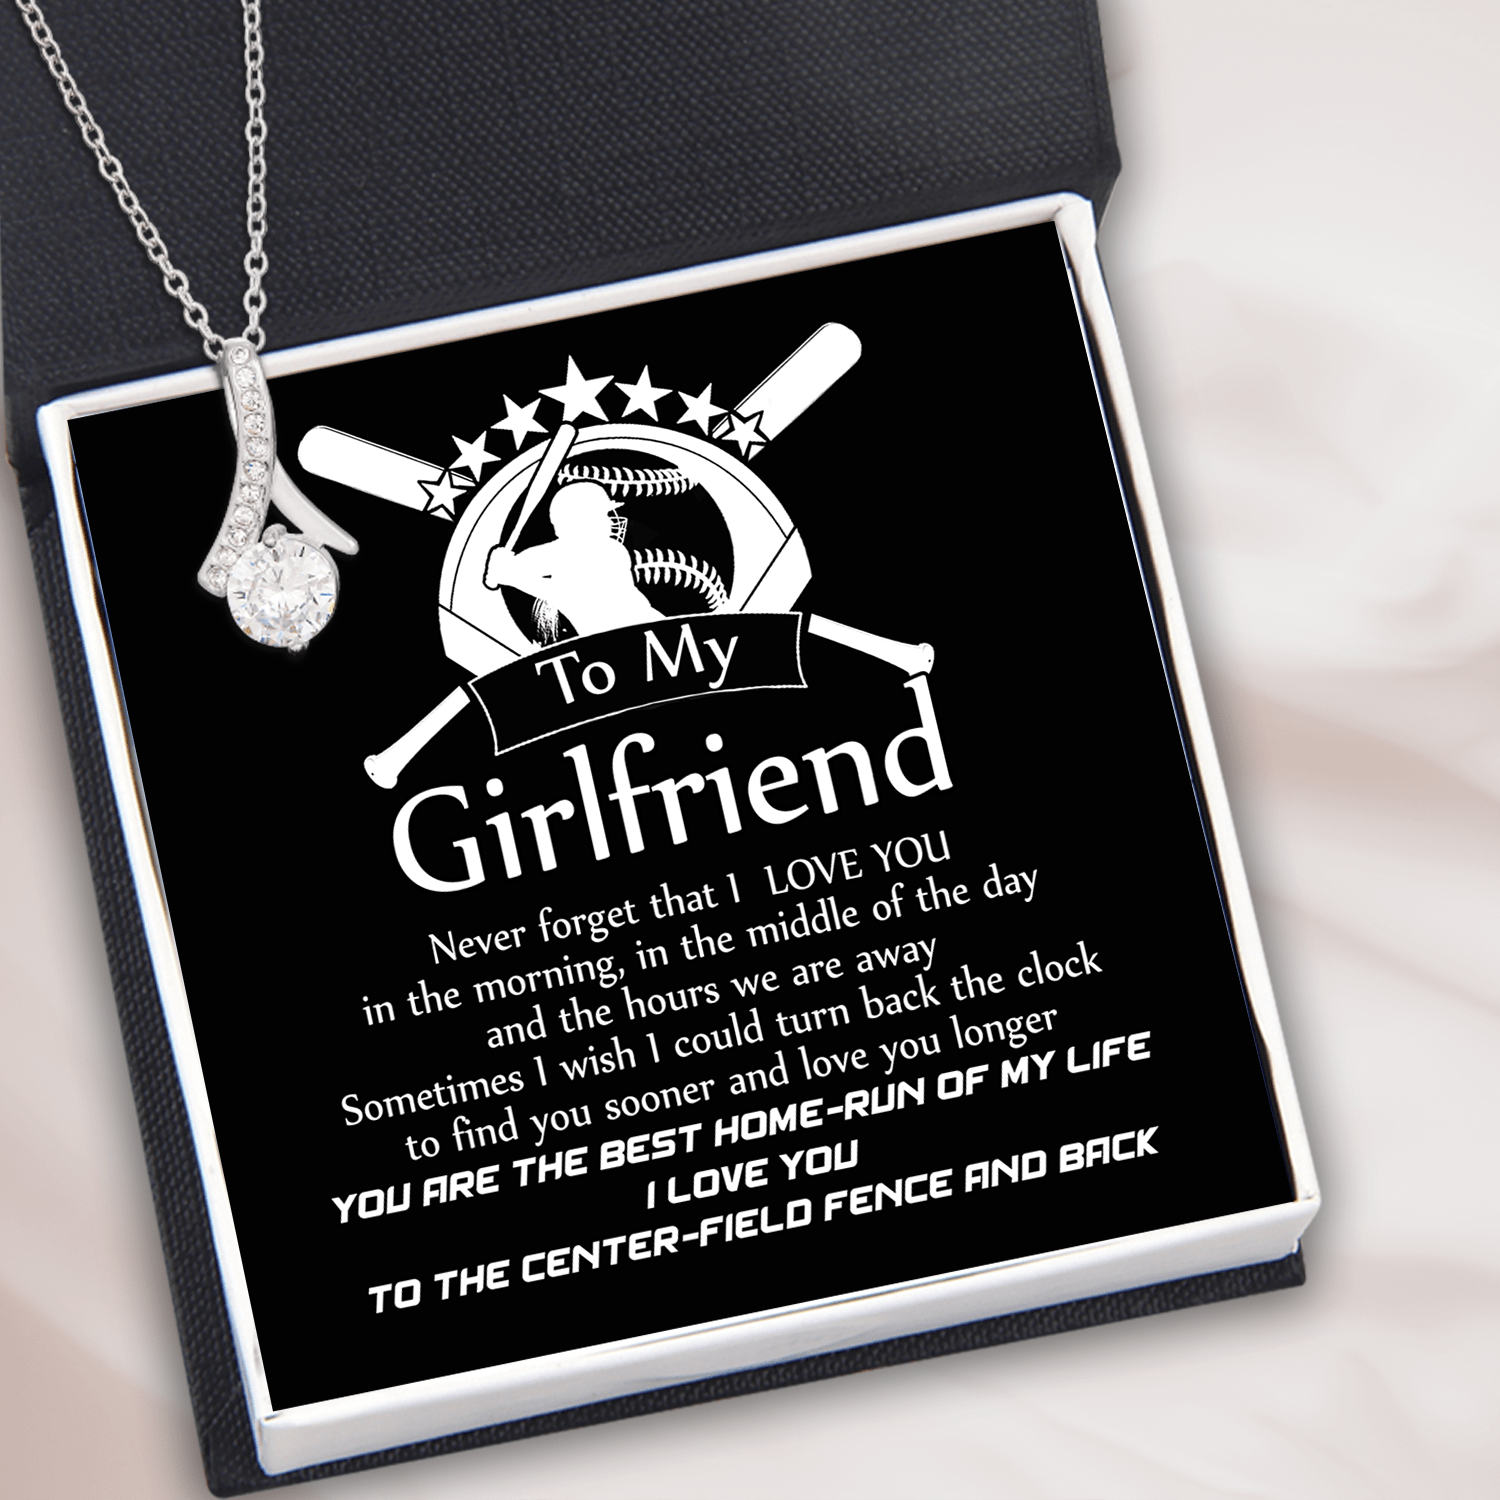 Alluring Beauty Necklace - Softball - To My Girlfriend - You are the best Home-run of My Life - Snb13039